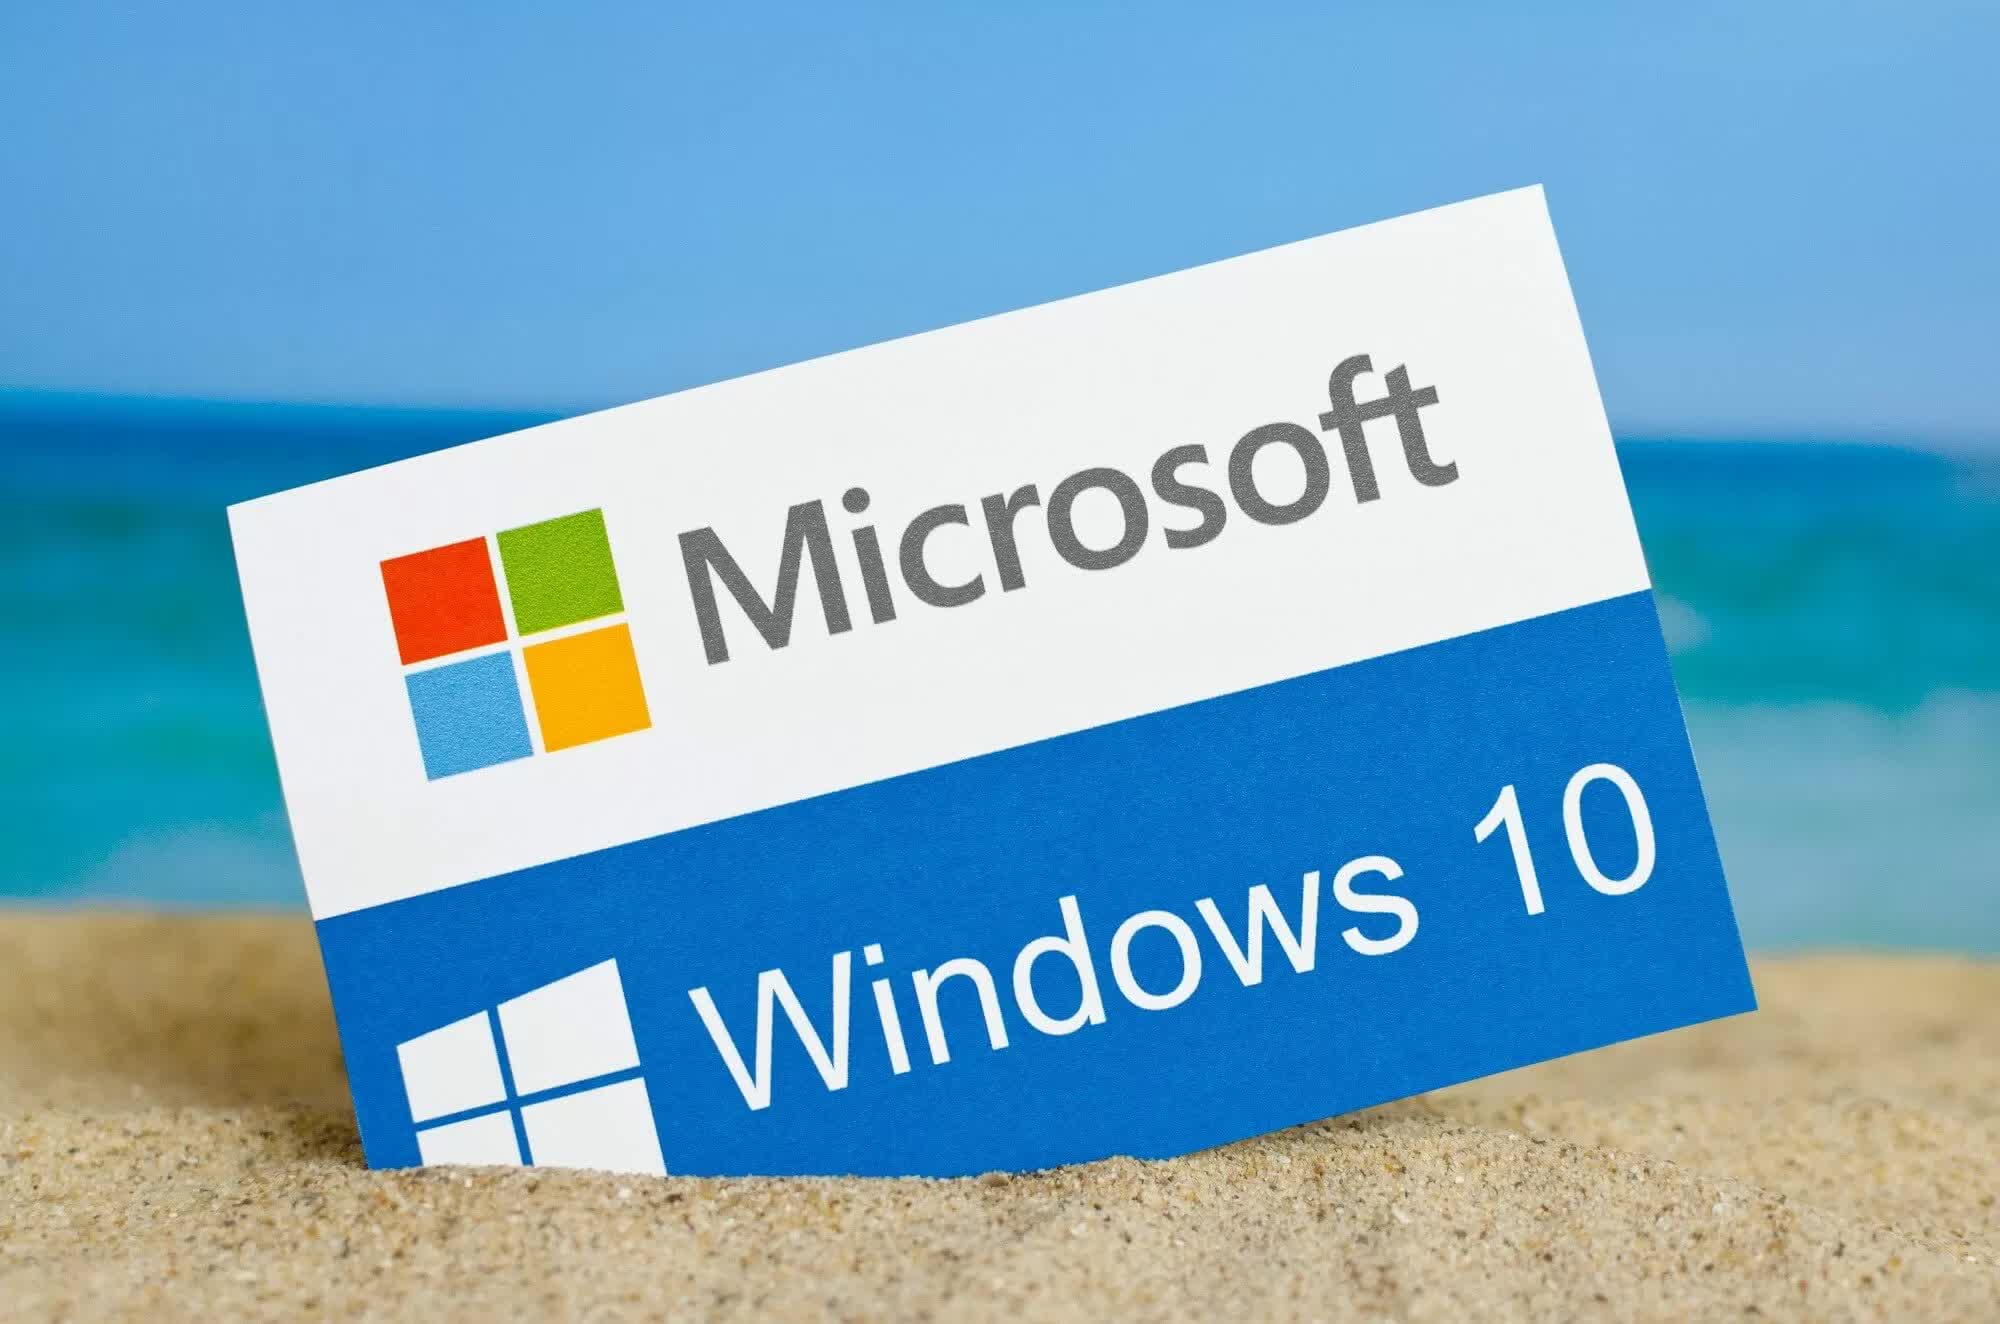 Recent Windows 10 security update borks gaming with unstable frame rates, boot loops, and more